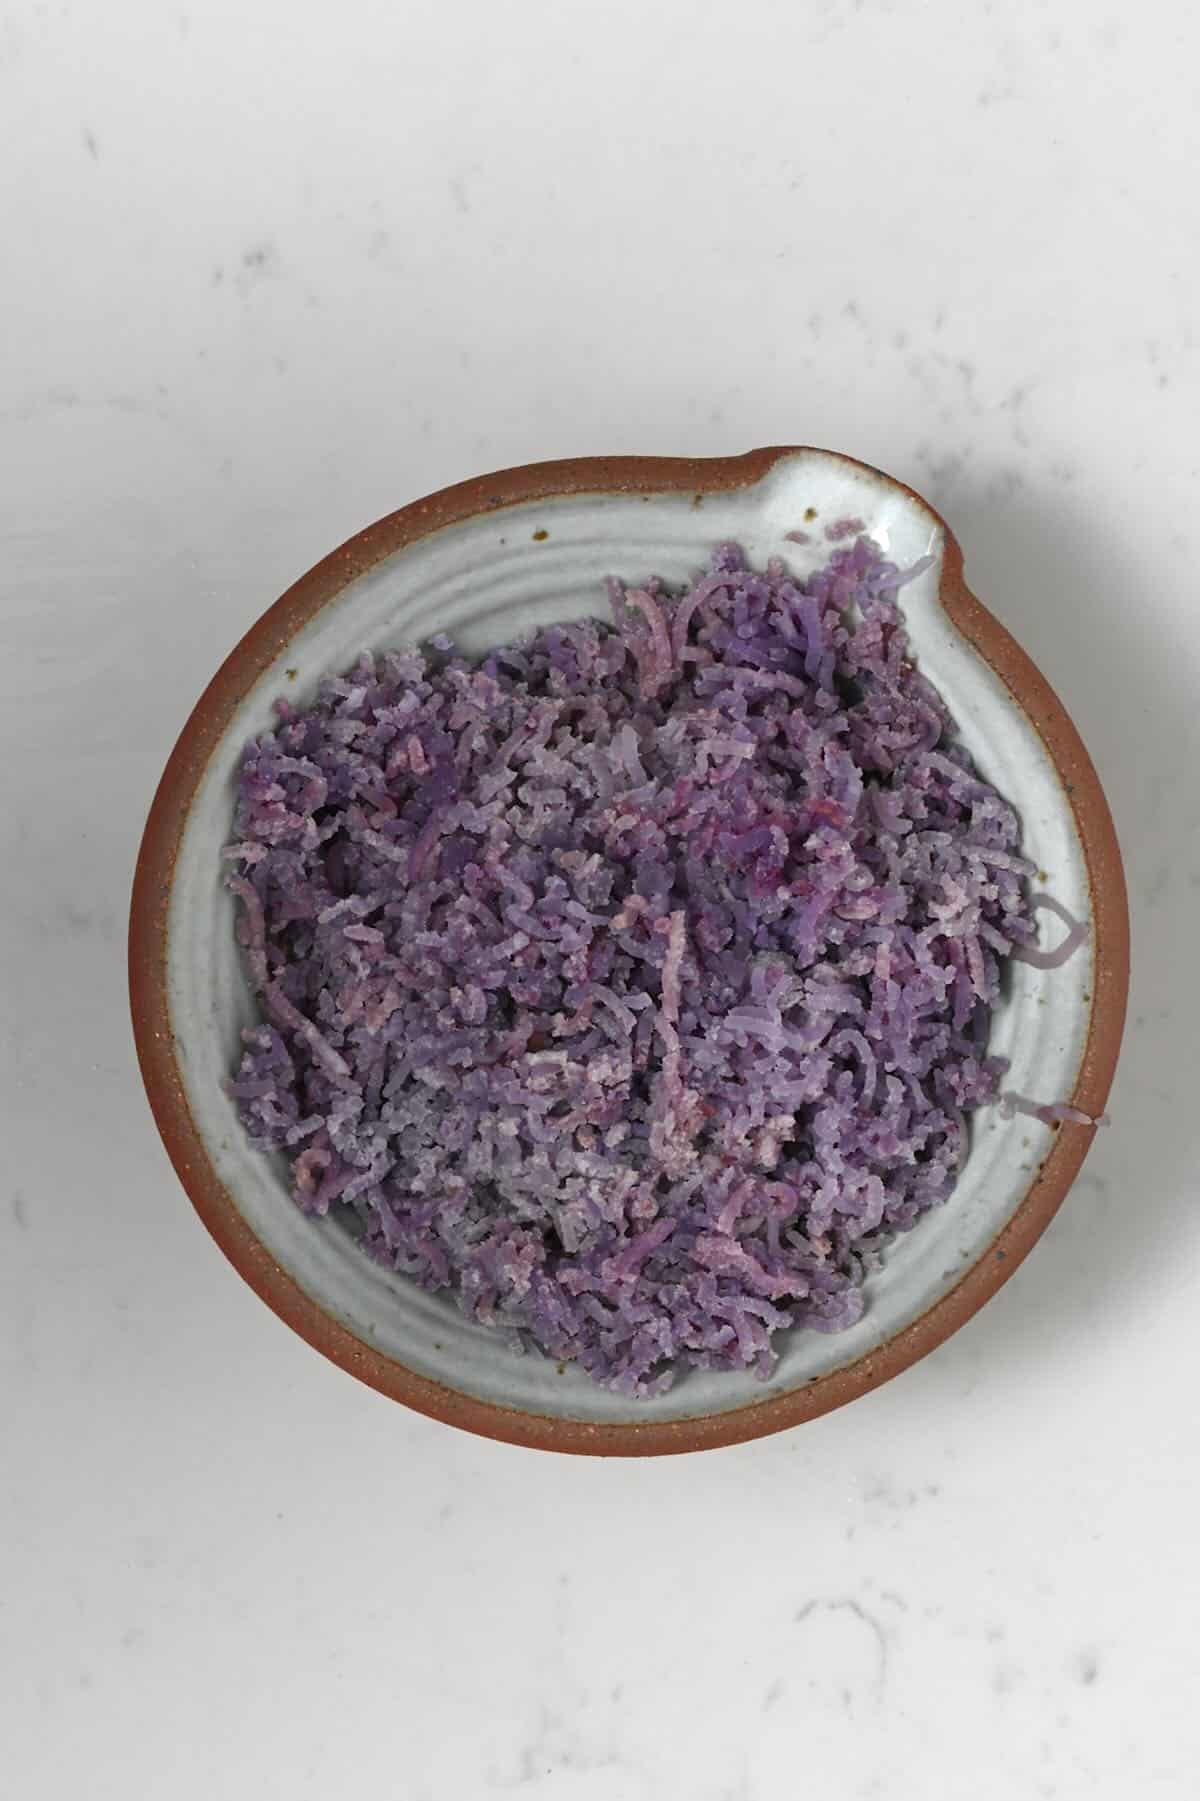 Mashed purple potatoes in a bowl